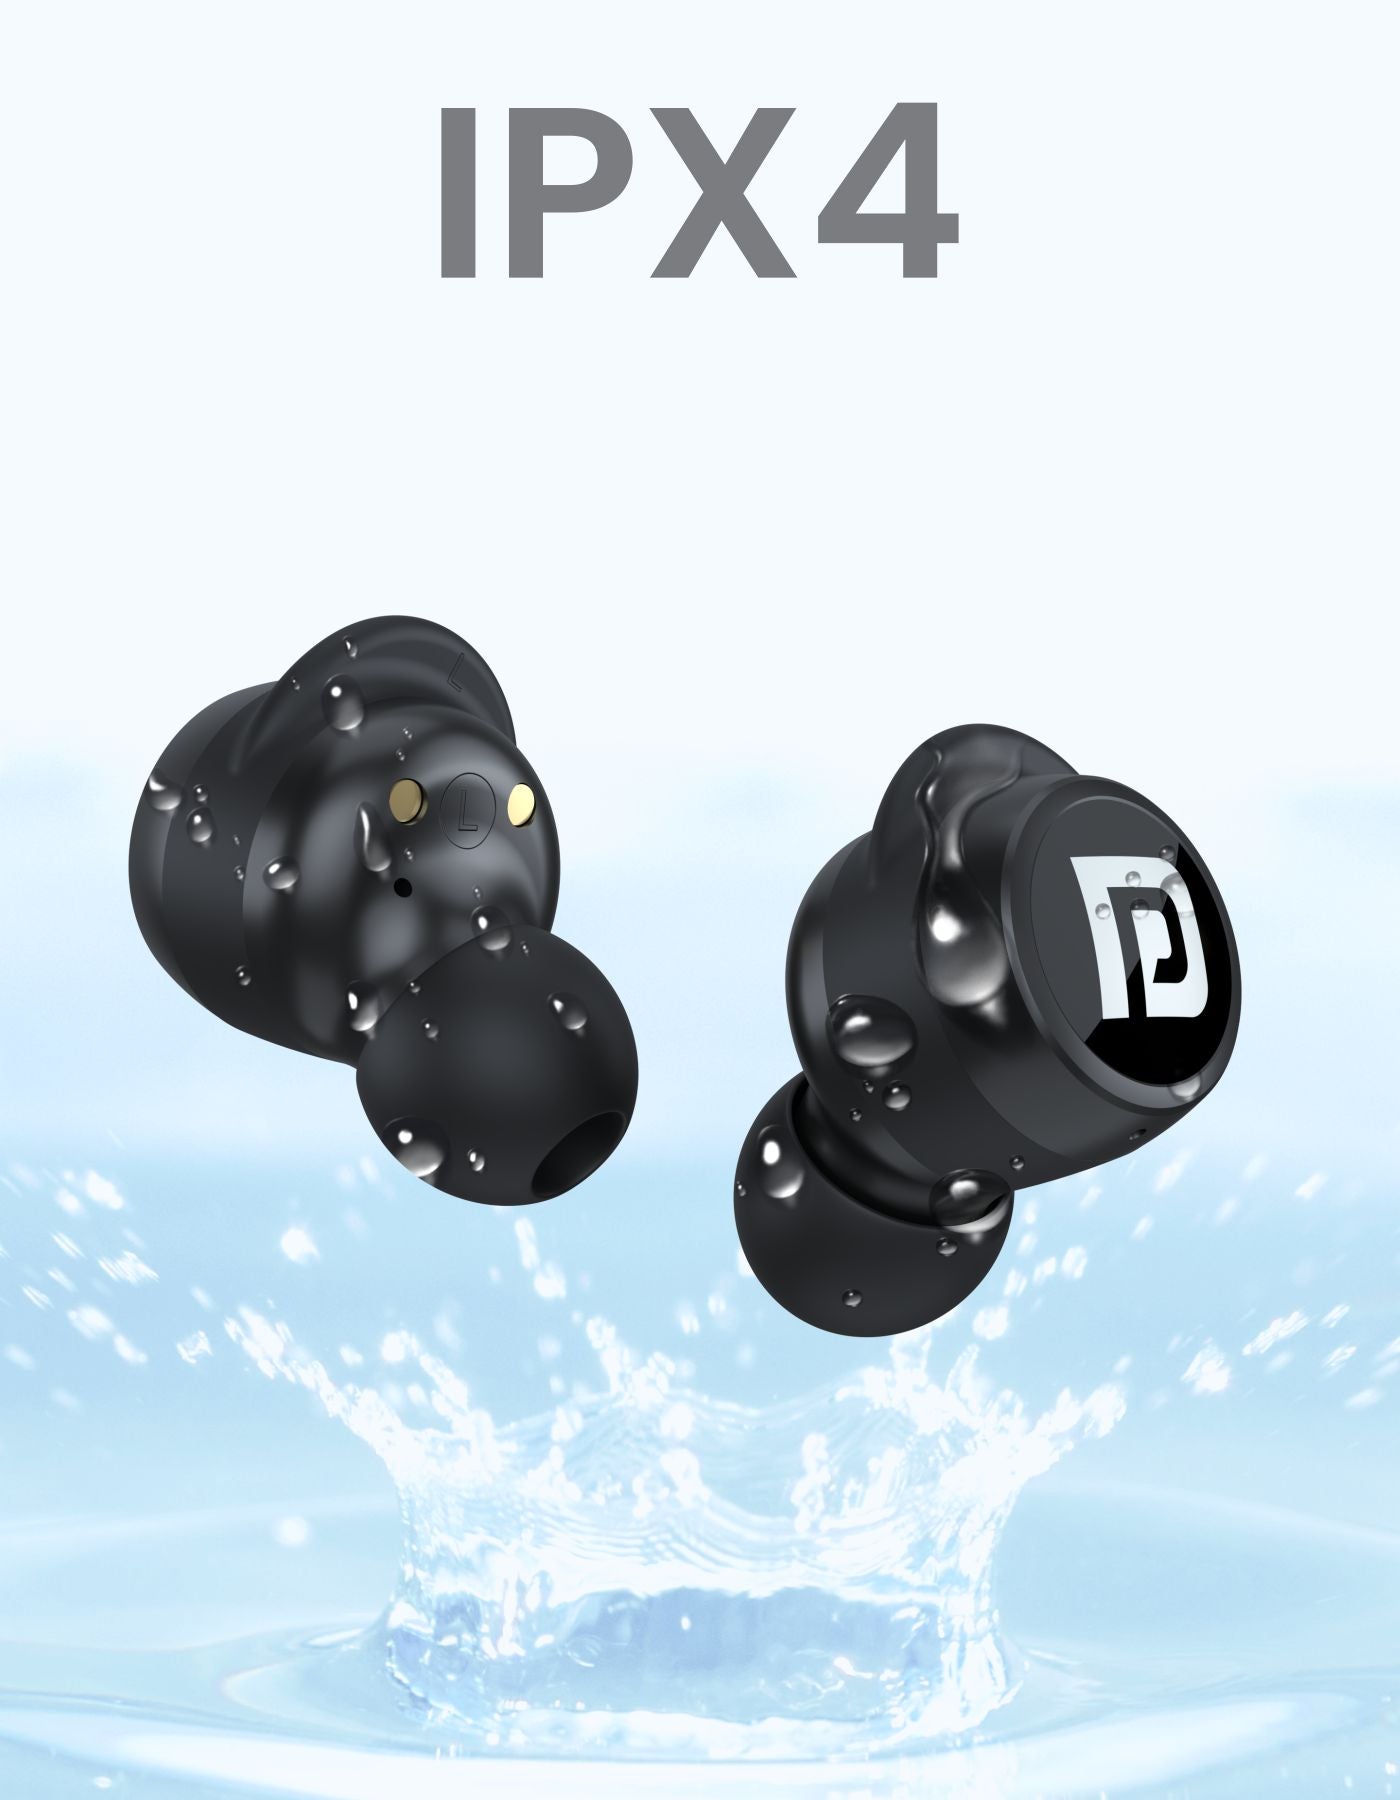 IPX4 water resistant wireless bluetooth earbuds price form portronics